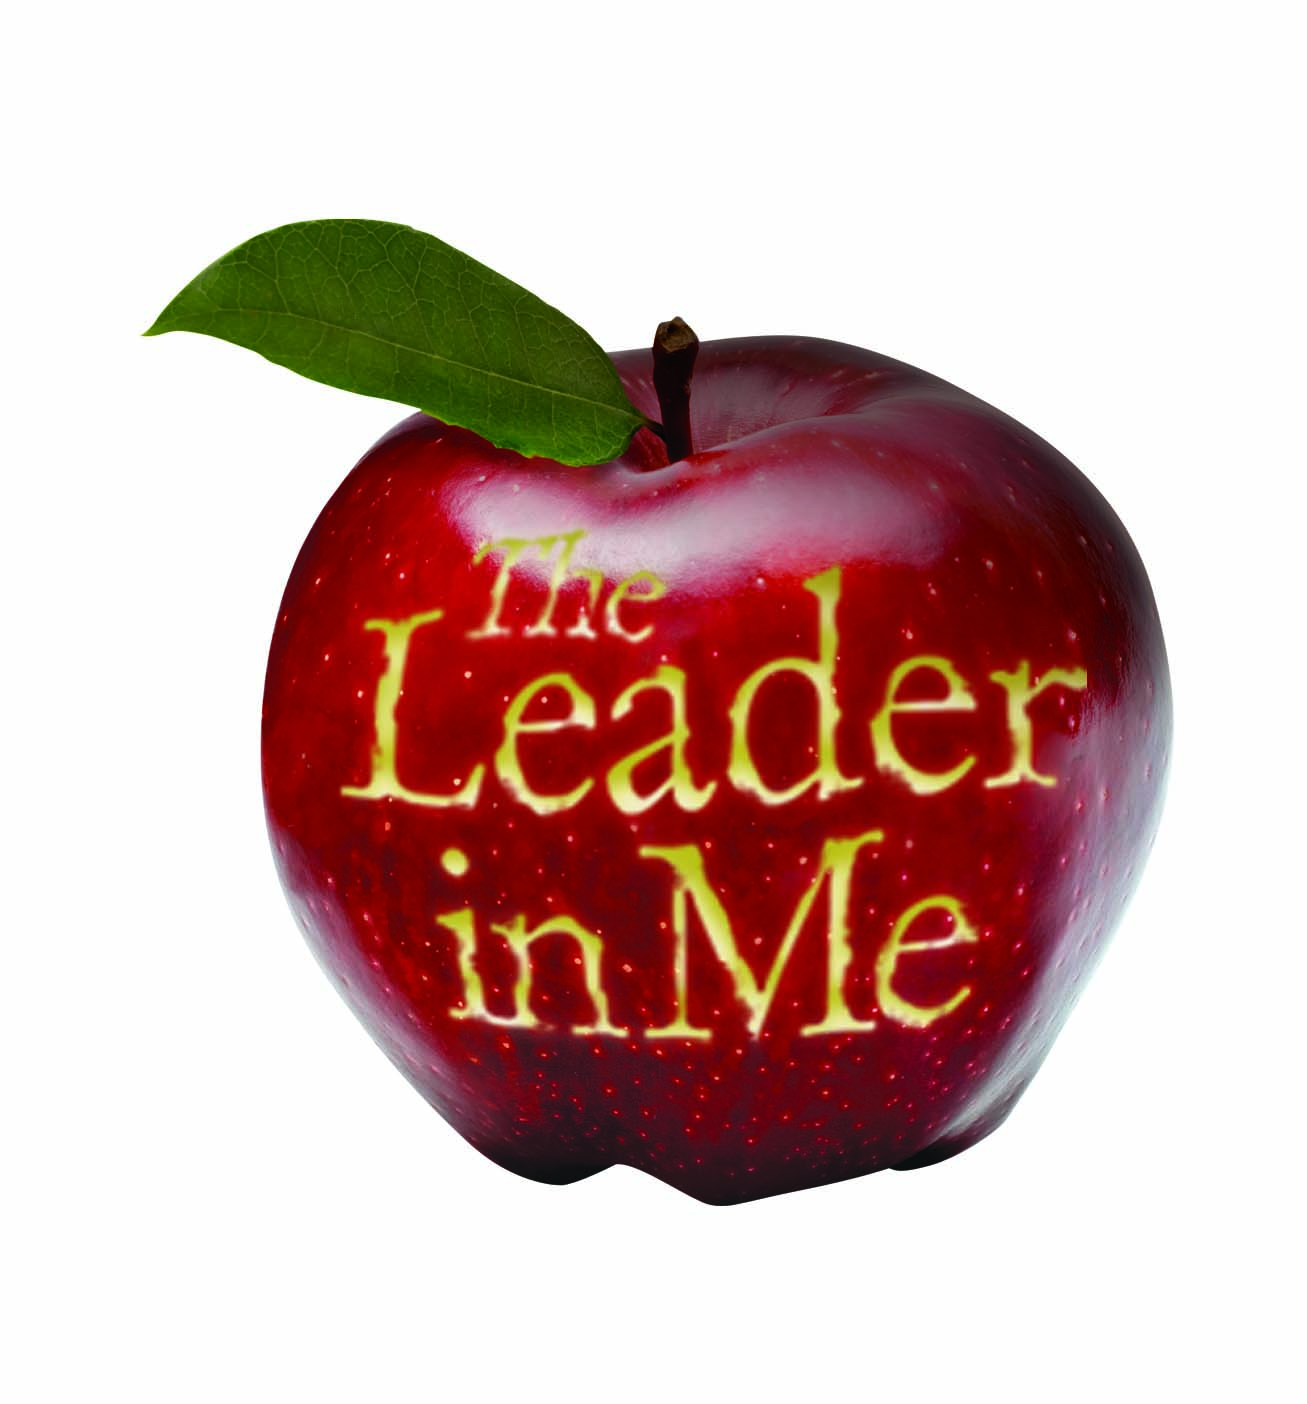 North Warren Has Adopted The Leader In Me Program For Our School  You